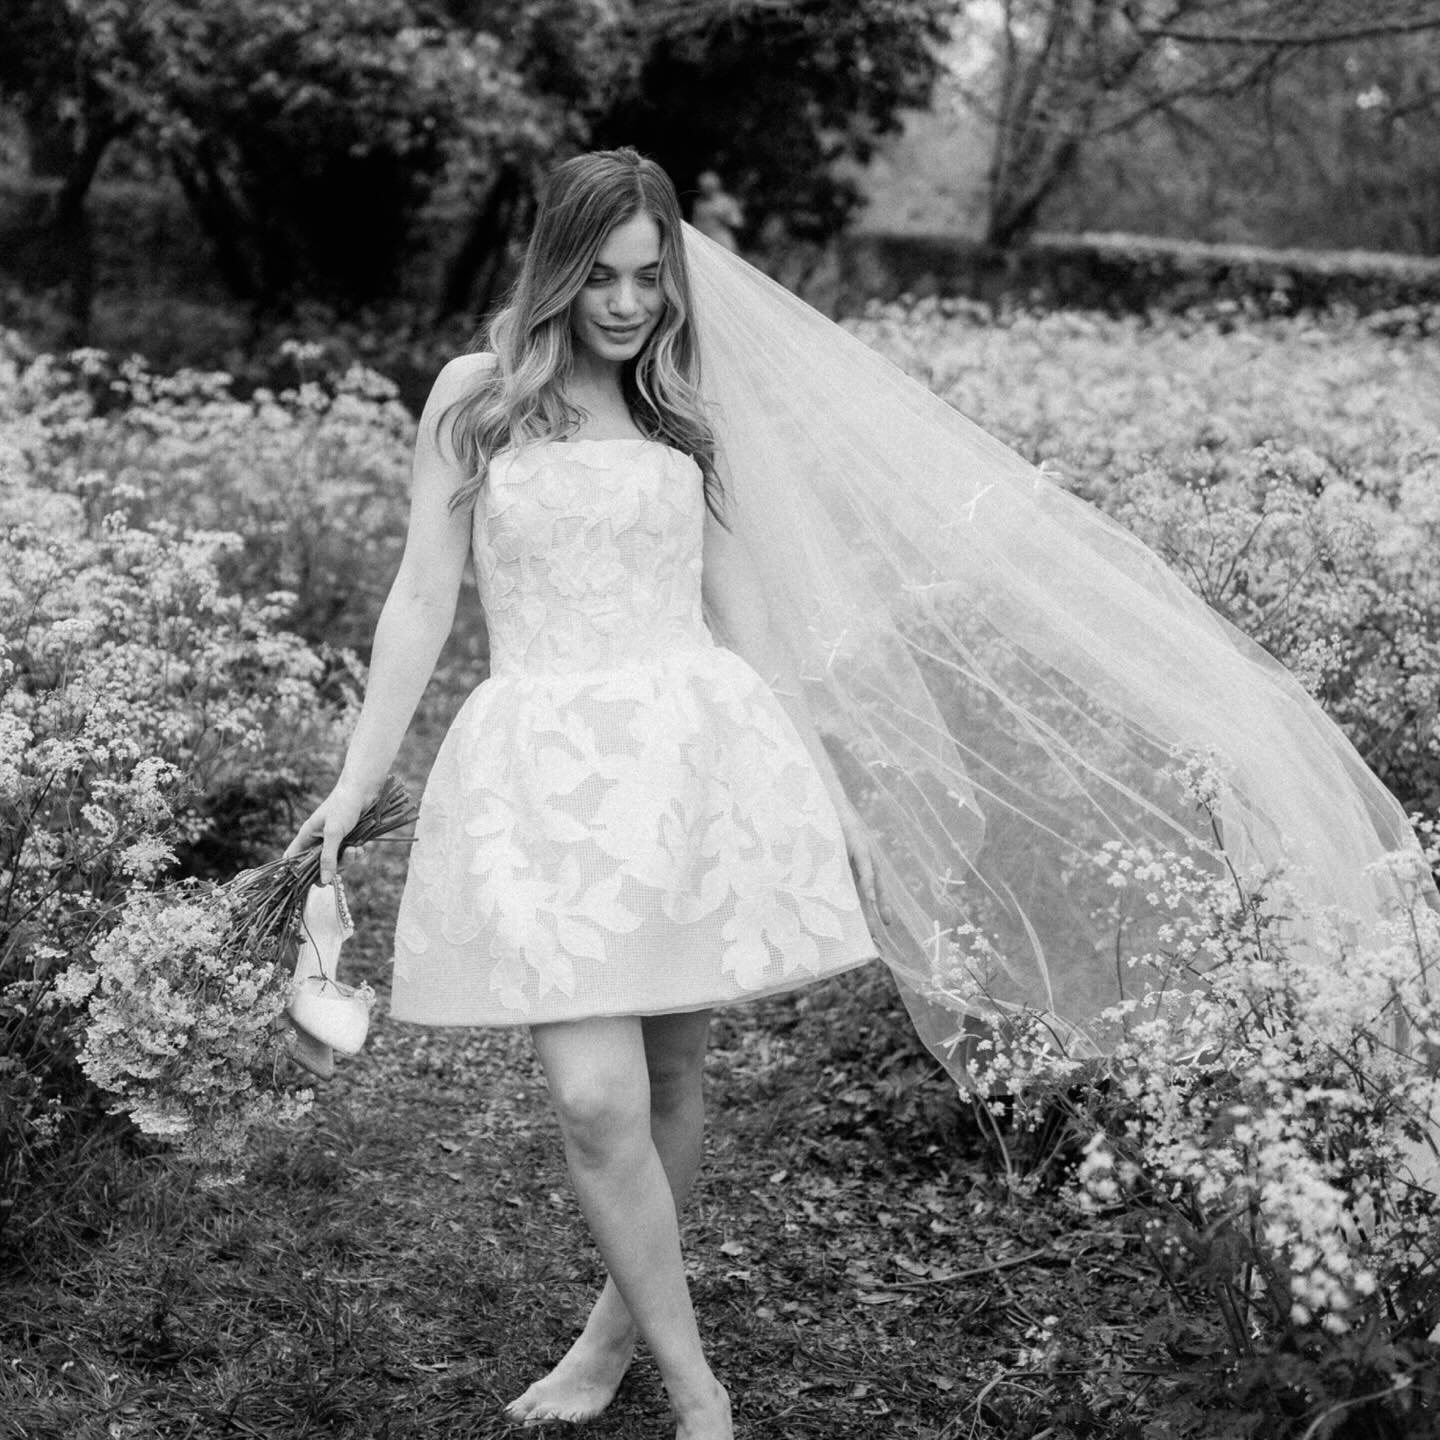 Having your solo bride moment&hellip;
Also a few 35mm film pictures in here too

Planner and coordinator @rebeccamarieweddings @workshopsbylark 
Venue @cornwell_manor 
Furniture hire @houseoffurncollection 
Decor hire @theluxecollectionuk 
Florist bl